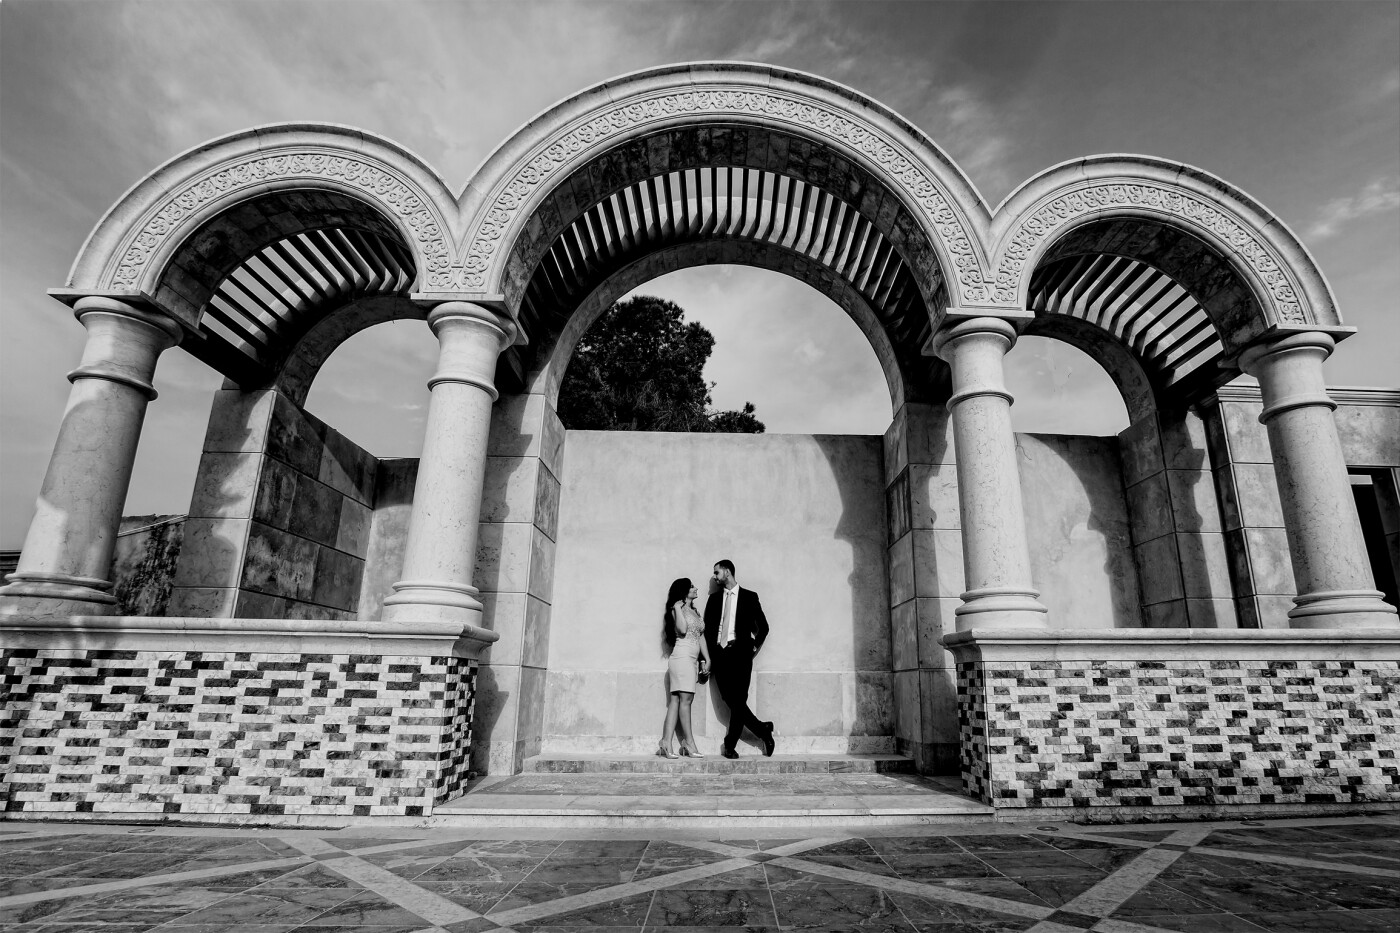 This was the first time shooting in this huge palace that is located in salt-city, Jordan. The couples Salam and Odai were amazingly excited,  as it was their engagement day, but we did not have a plenty of time for the shoot. The beautiful love story of Salam and Odai lasted 8 years!   so I thought to myself I should make a beautiful image of them that lasts forever!